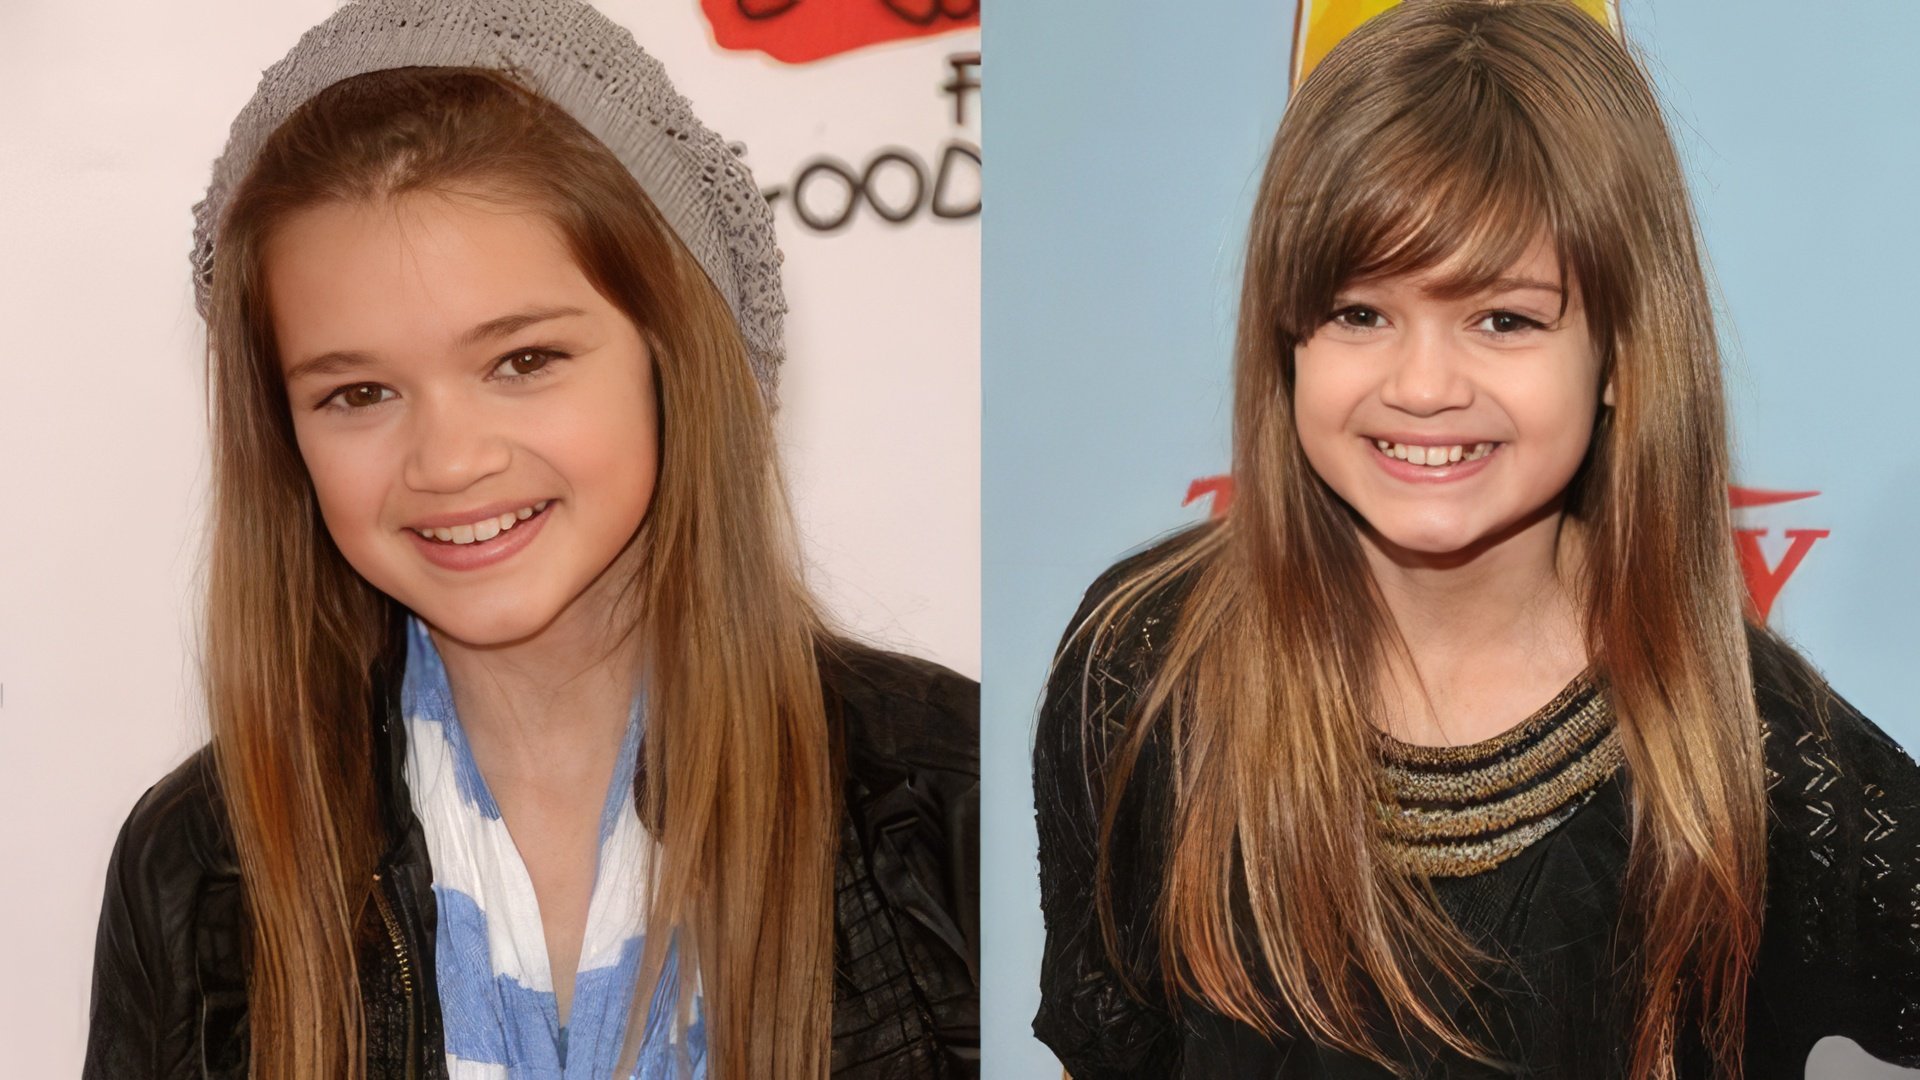 Ciara Bravo’s career began when she was just a child